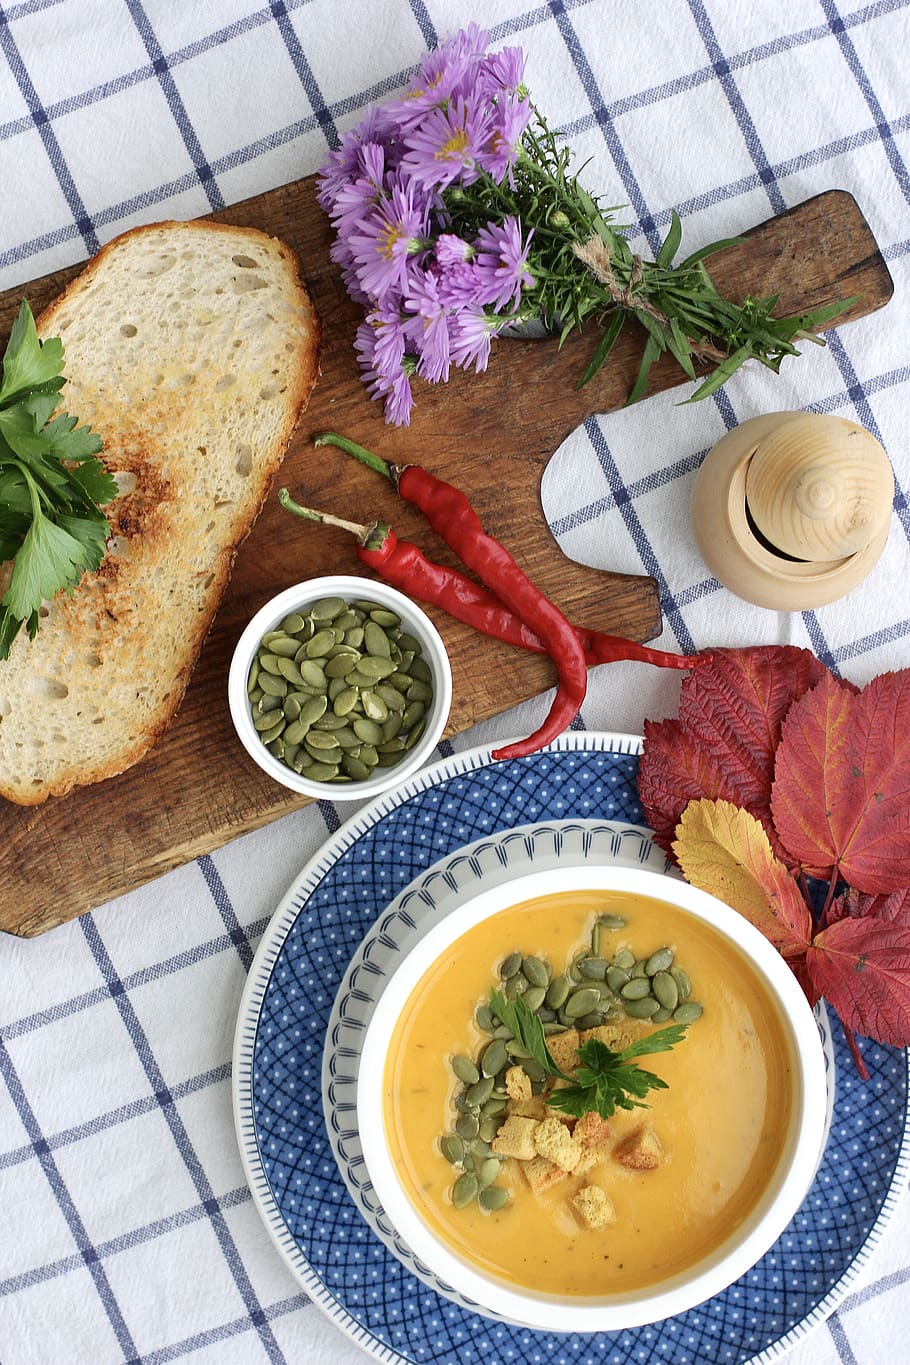 bread, pumpkin, lunch, autumn, leaves, food and drink, food, wellbeing, plant, freshness